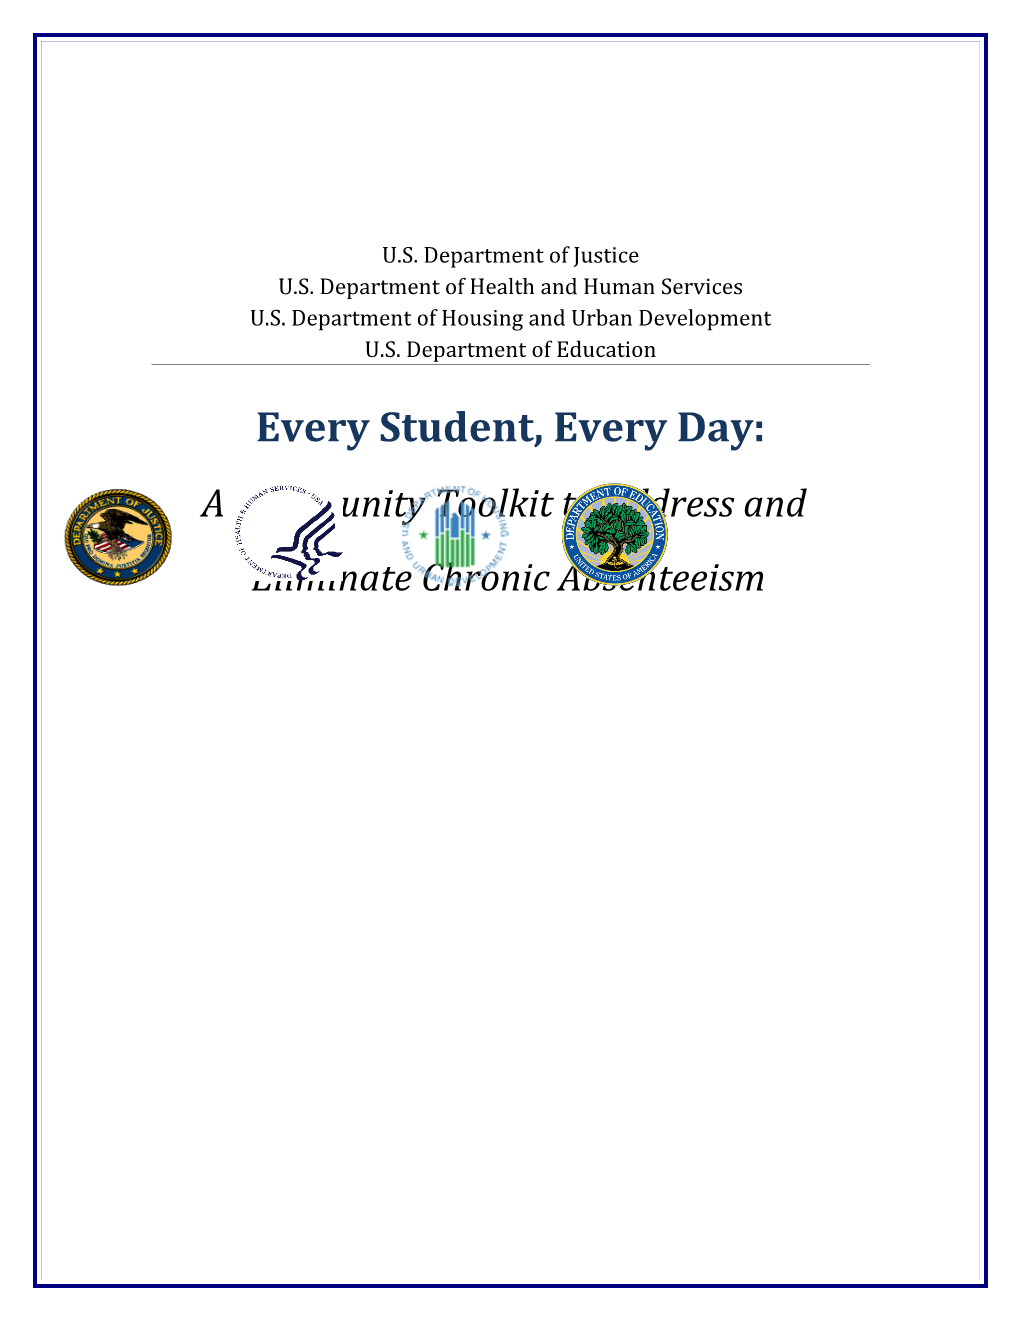 Every Student, Every Day: a Community Toolkit to Address and Eliminate Chronic Absenteeism